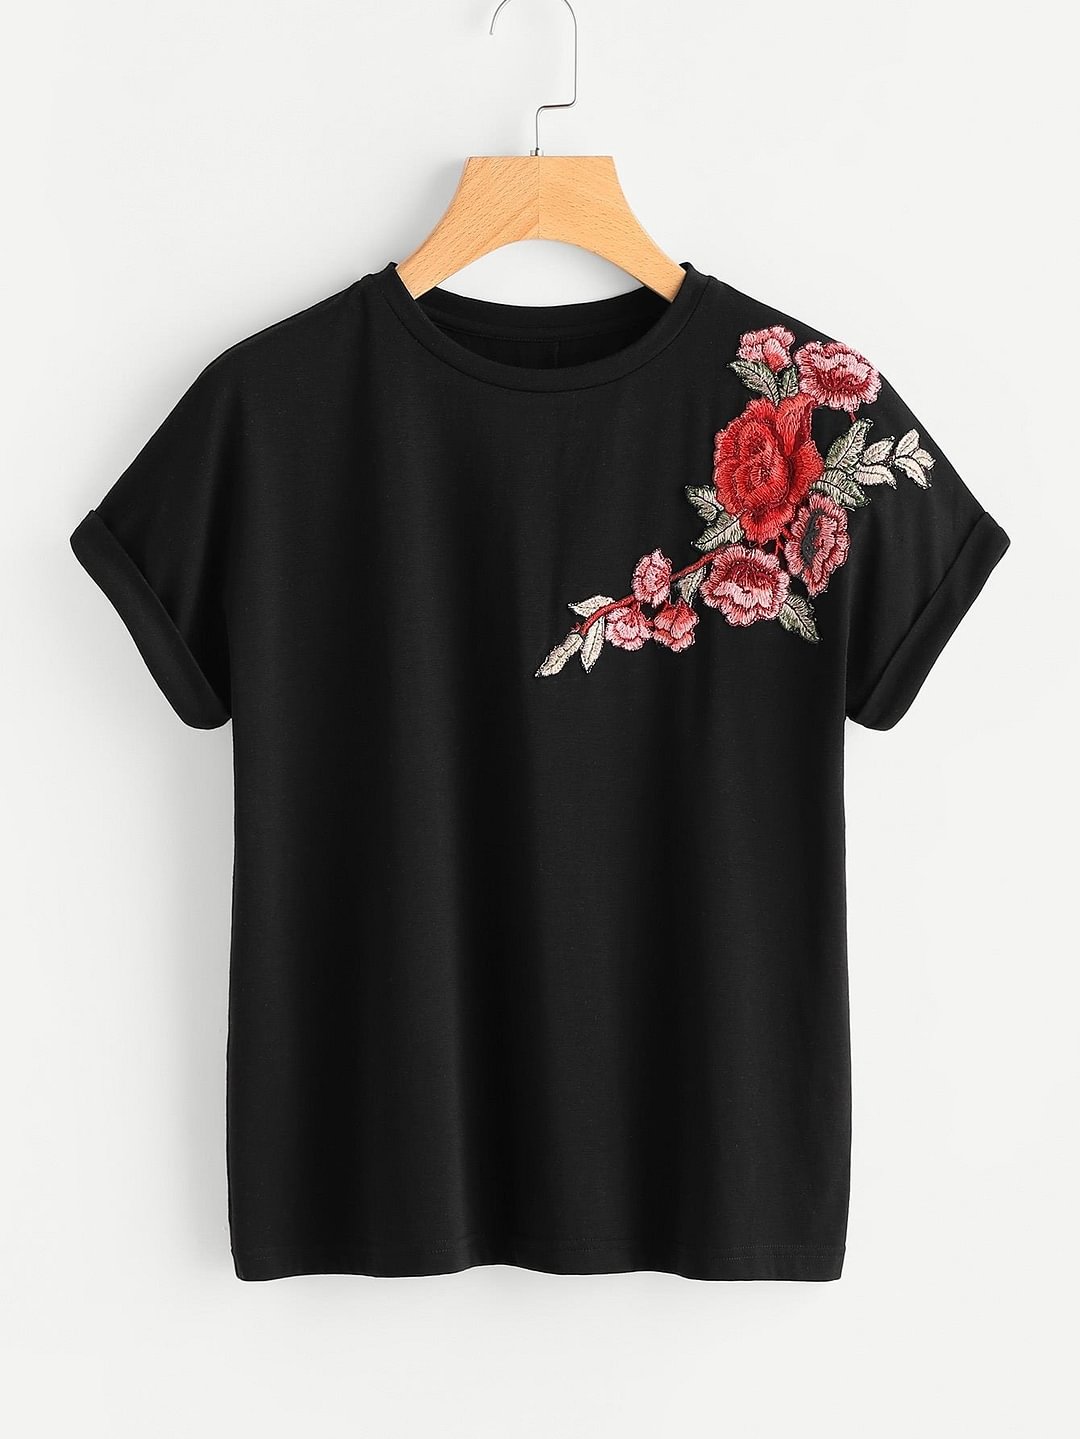 Floral Patch Cuffed Sleeve Tee